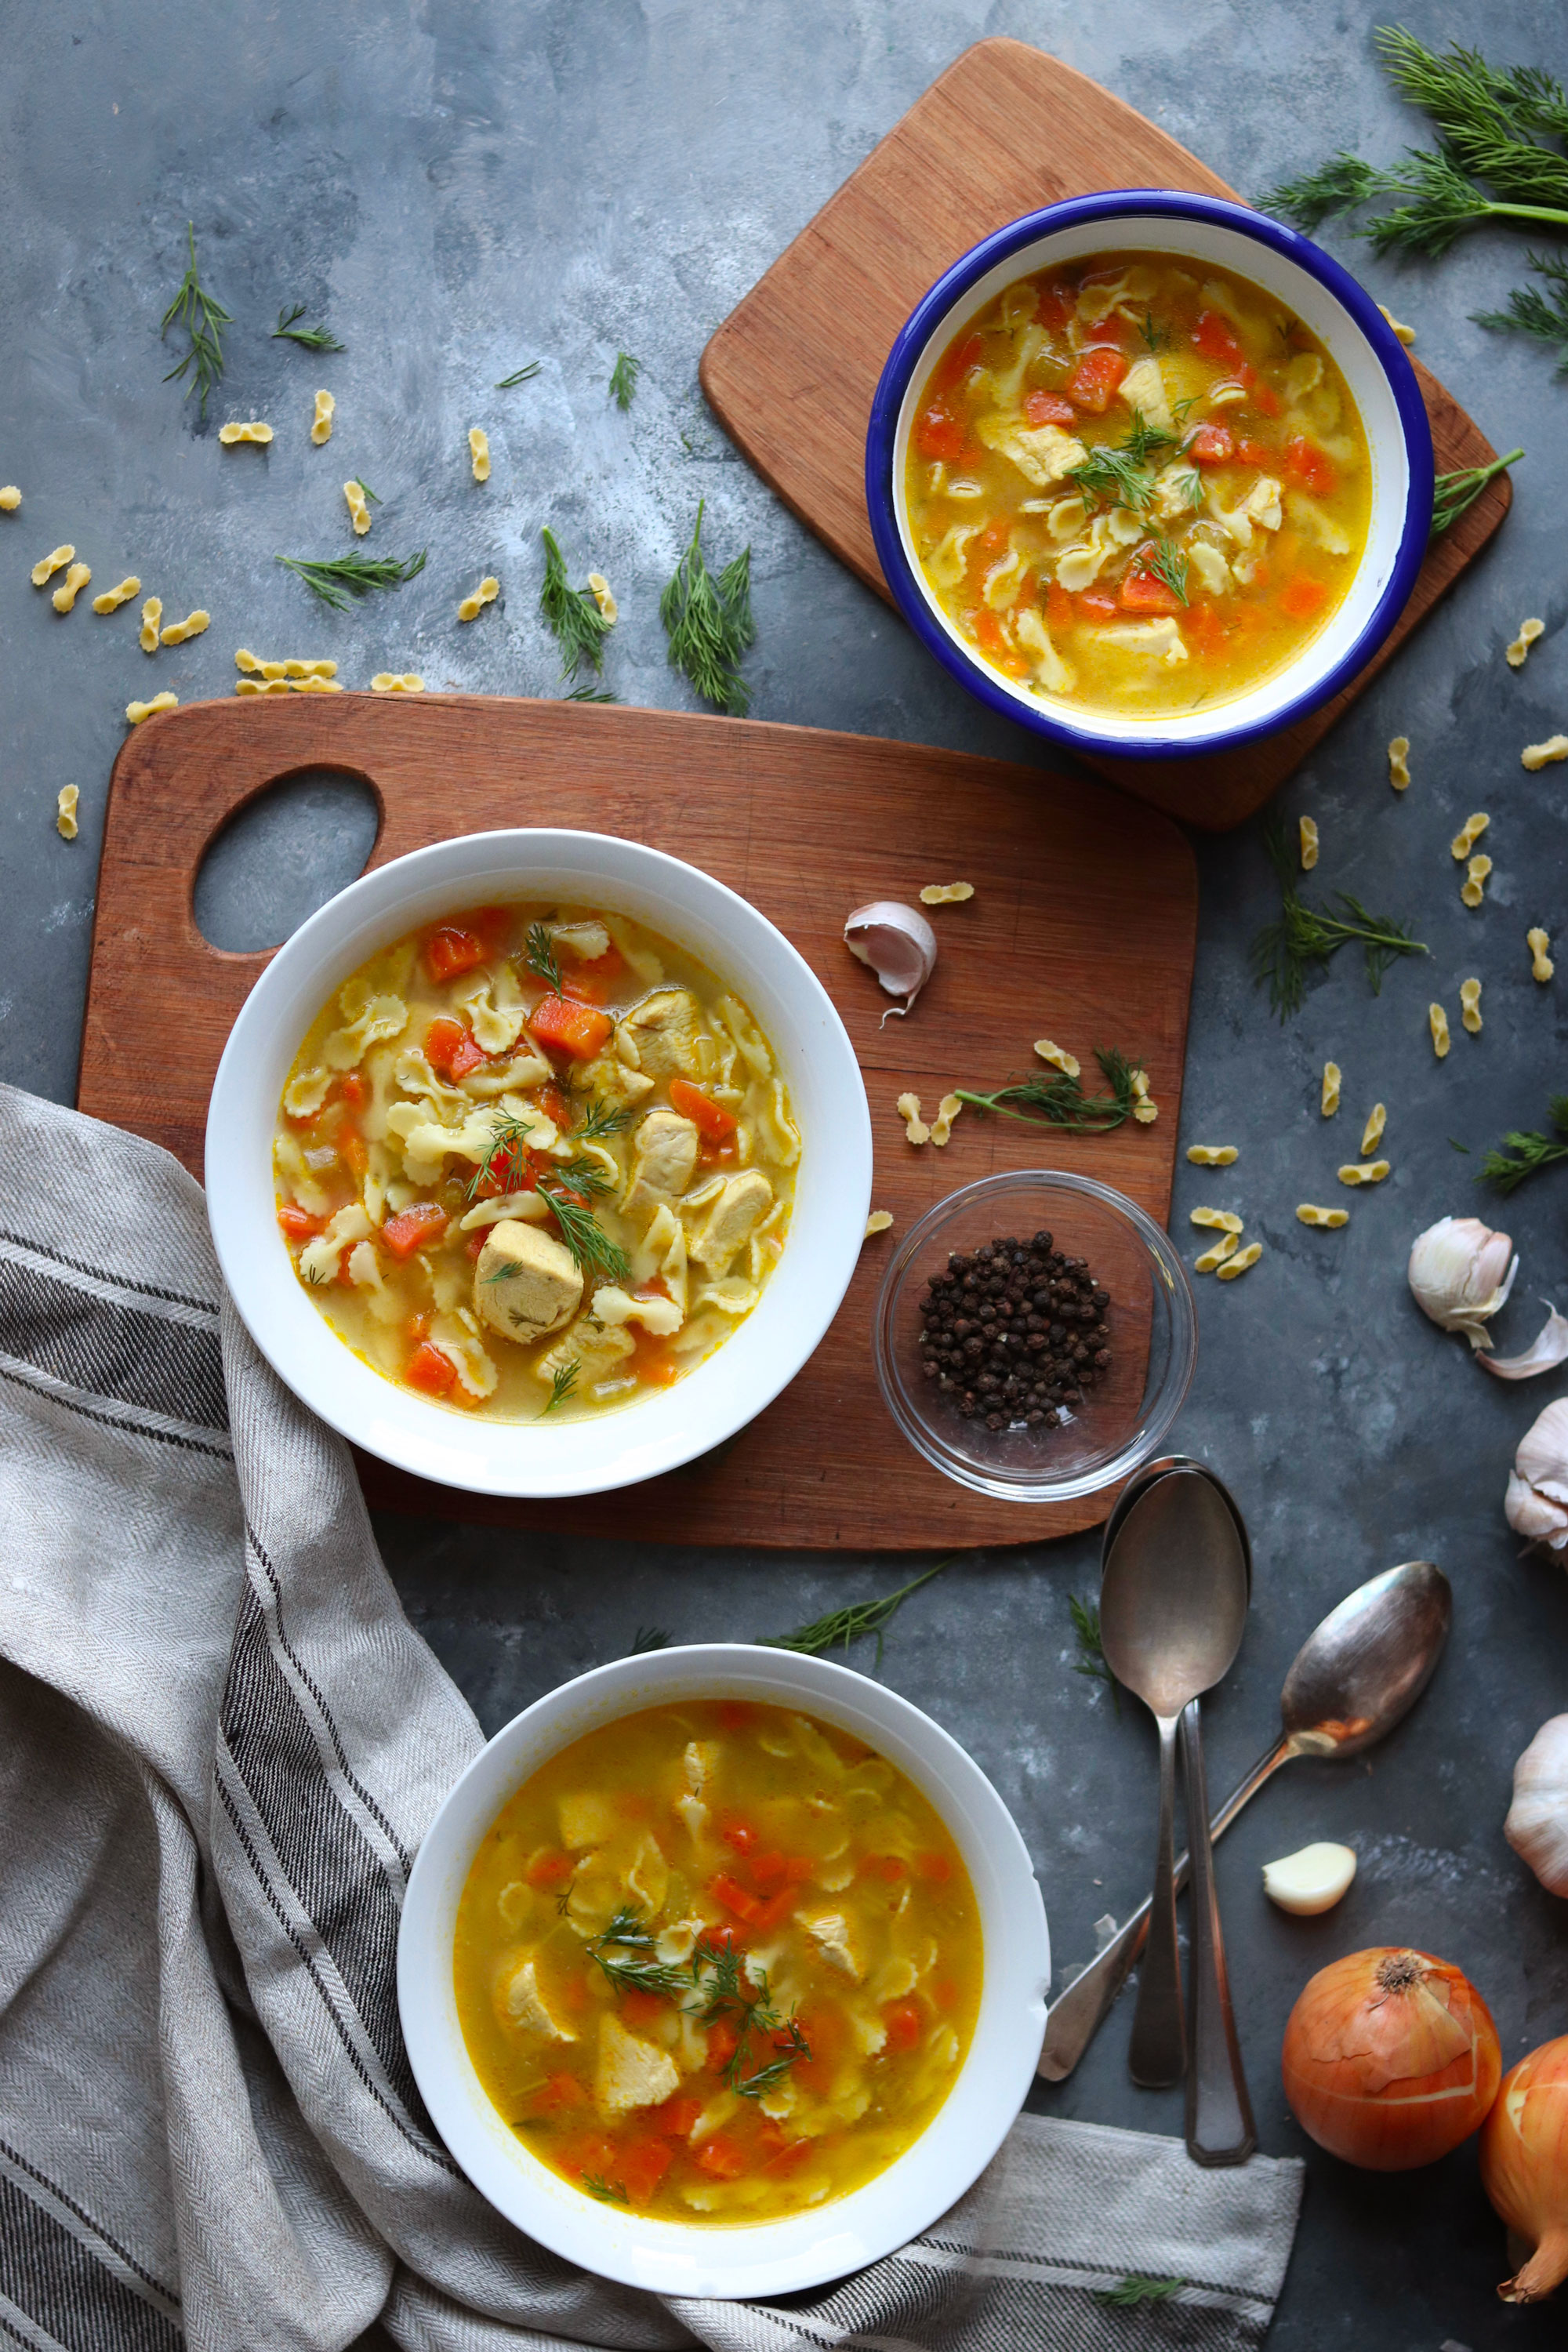 Chicken and veggies pasta soup - Cold and flu buster